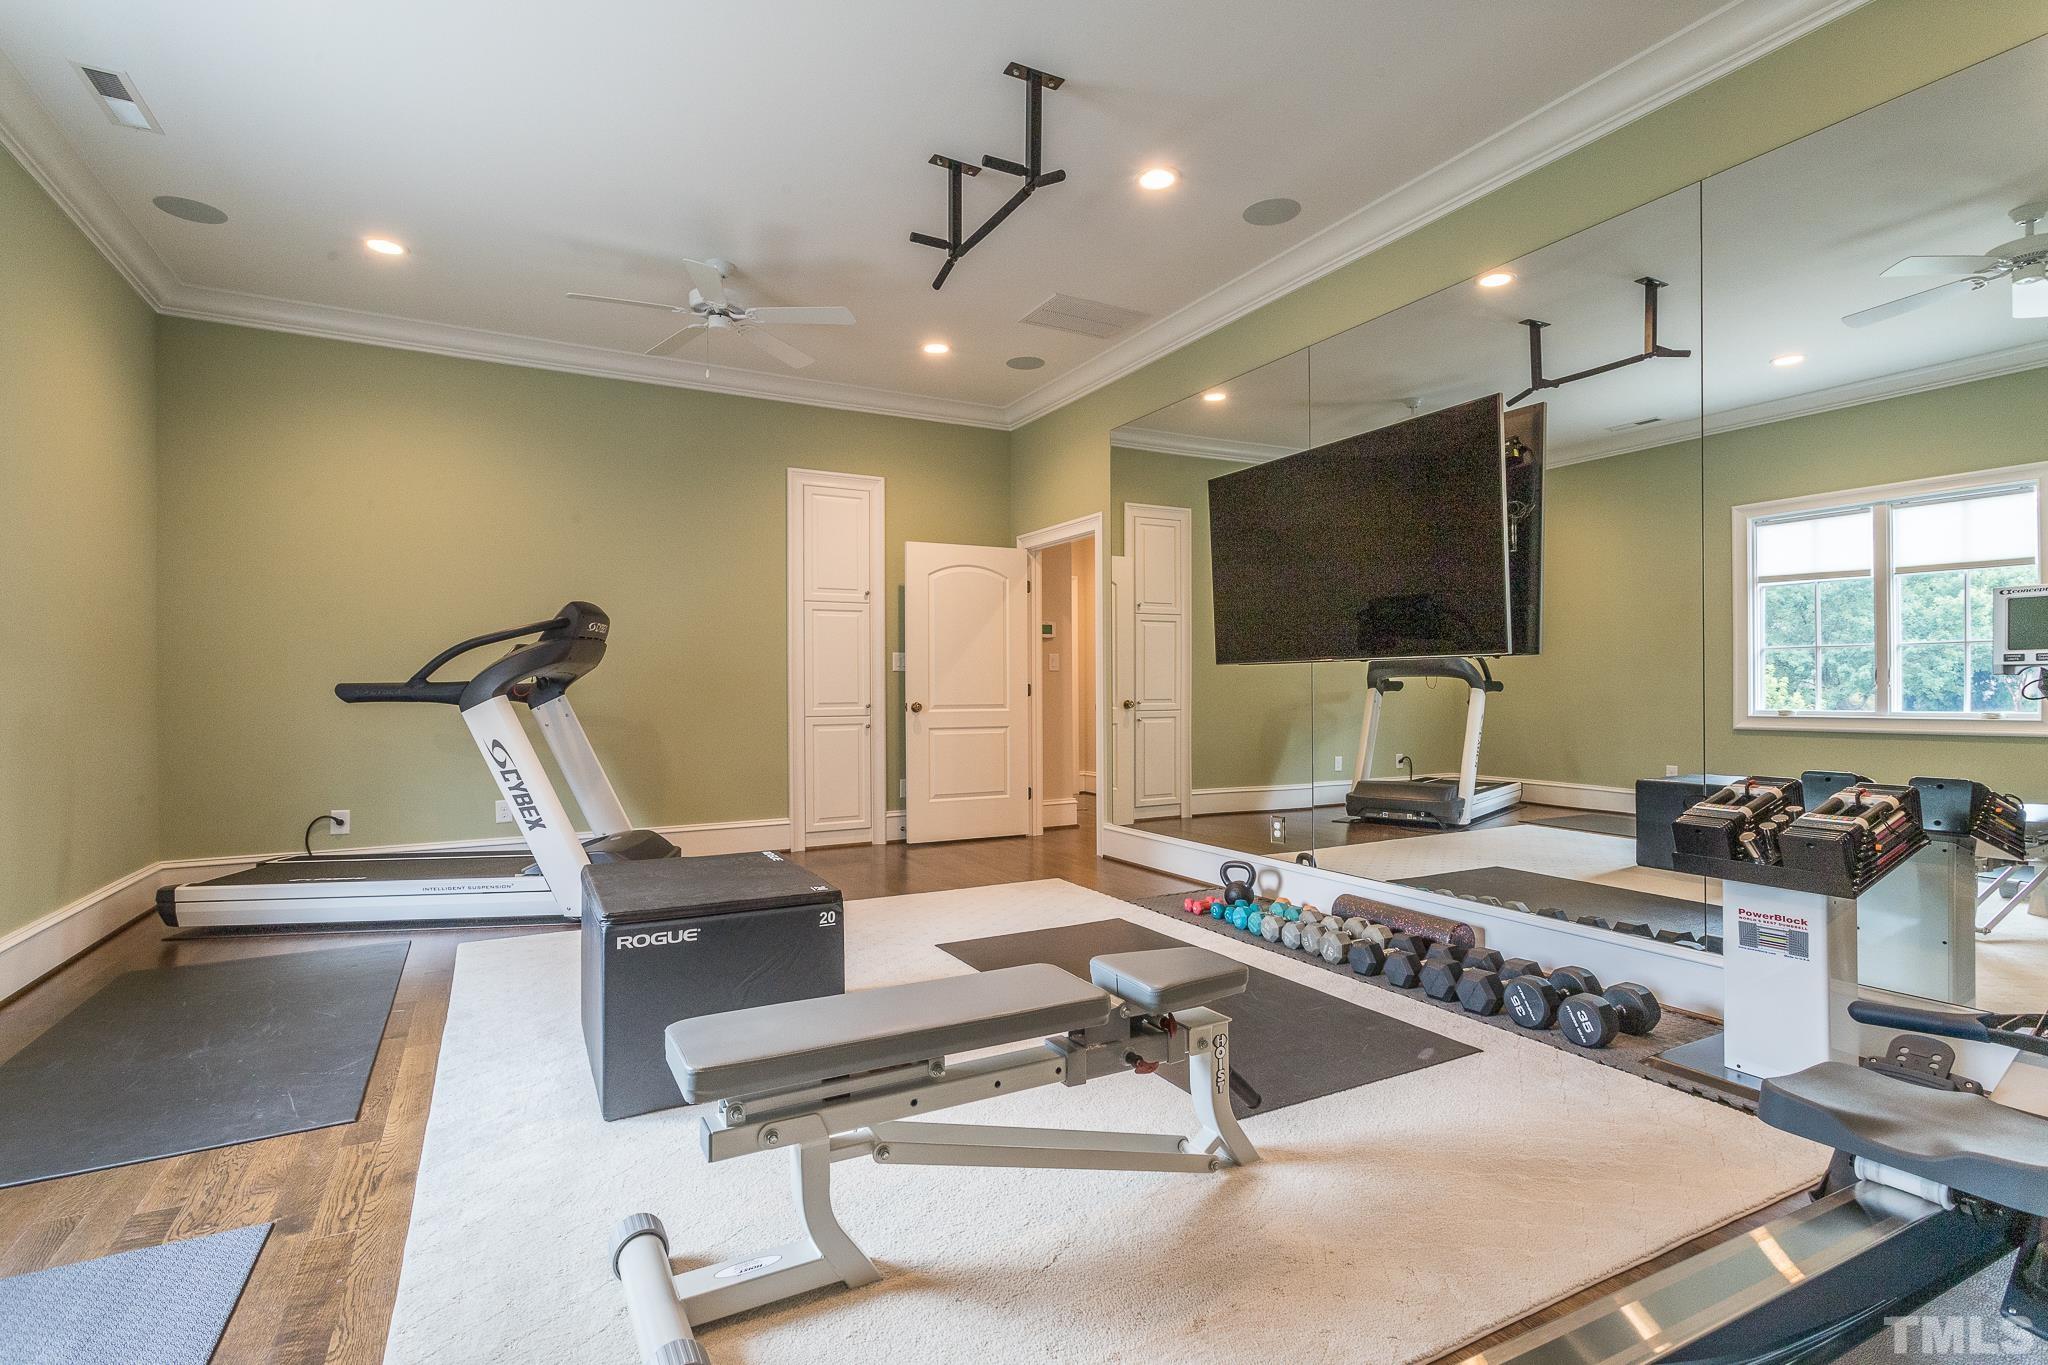 This room has endless possibilities as a home exercise/yoga room, office, theatre room, or craft room. It is connected a full bathroom.